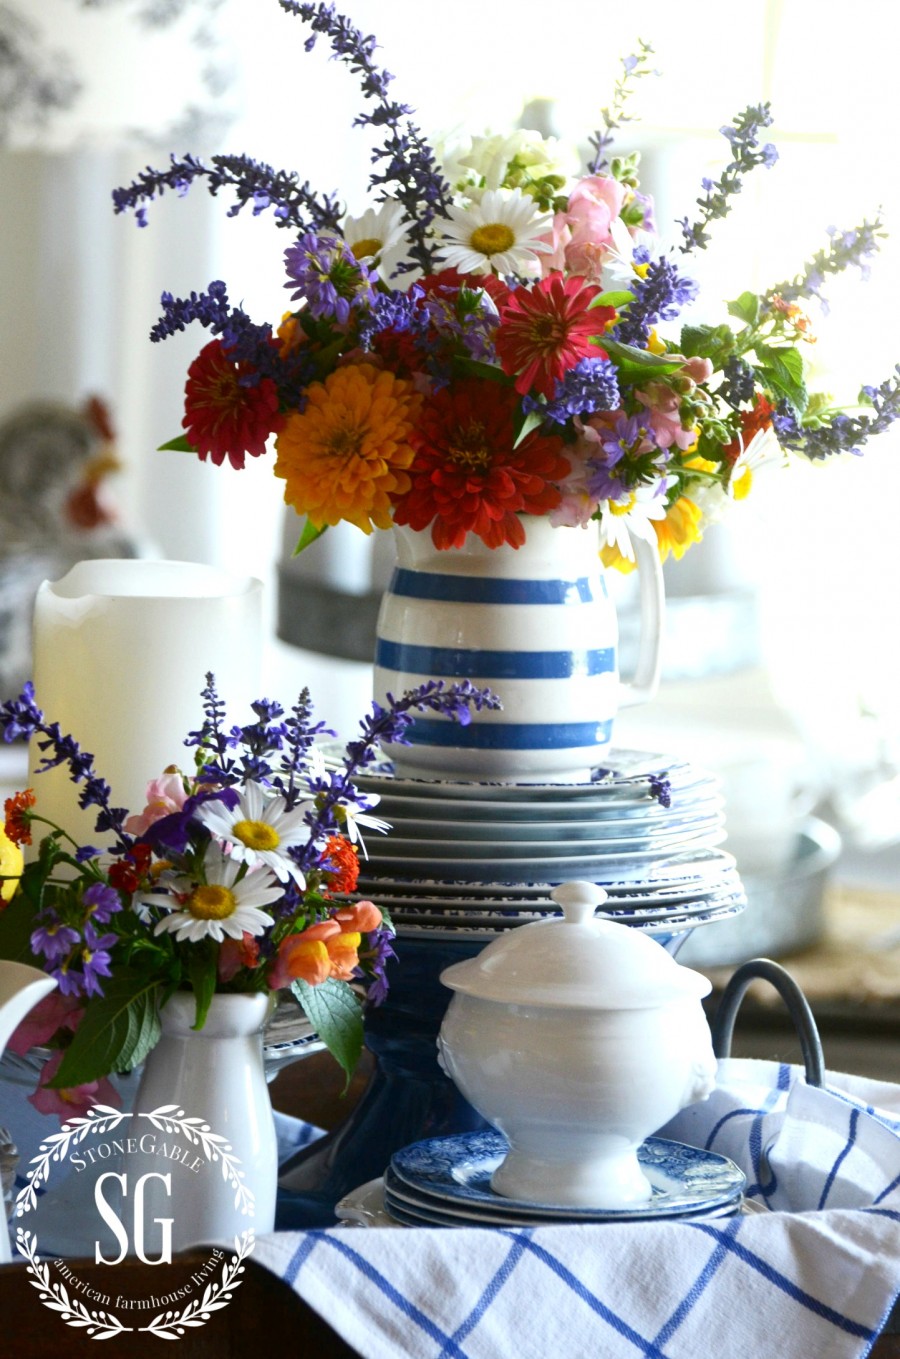 10 EASY WAYS TO DECORATE FOR SUMMER-bring cut flowers in from outdoorsw-stonegabseblog.com